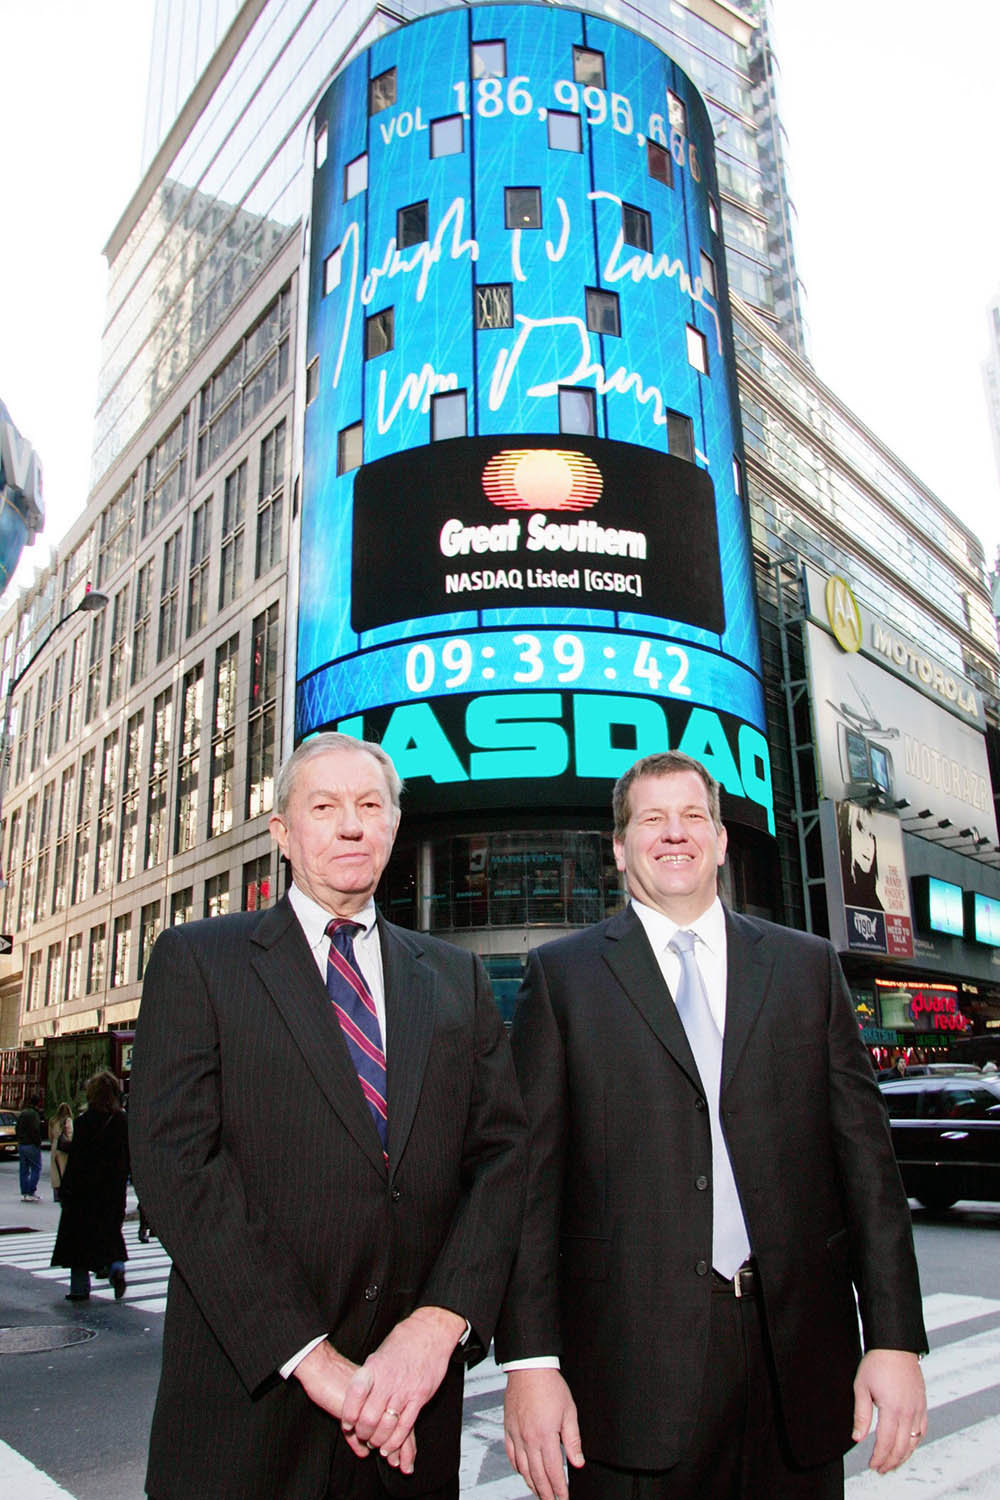 Bill Turner, left, and son Joe are in Times Square on Dec. 3, 2004, for Great Southern Bank’s opening of the Nasdaq stock market.